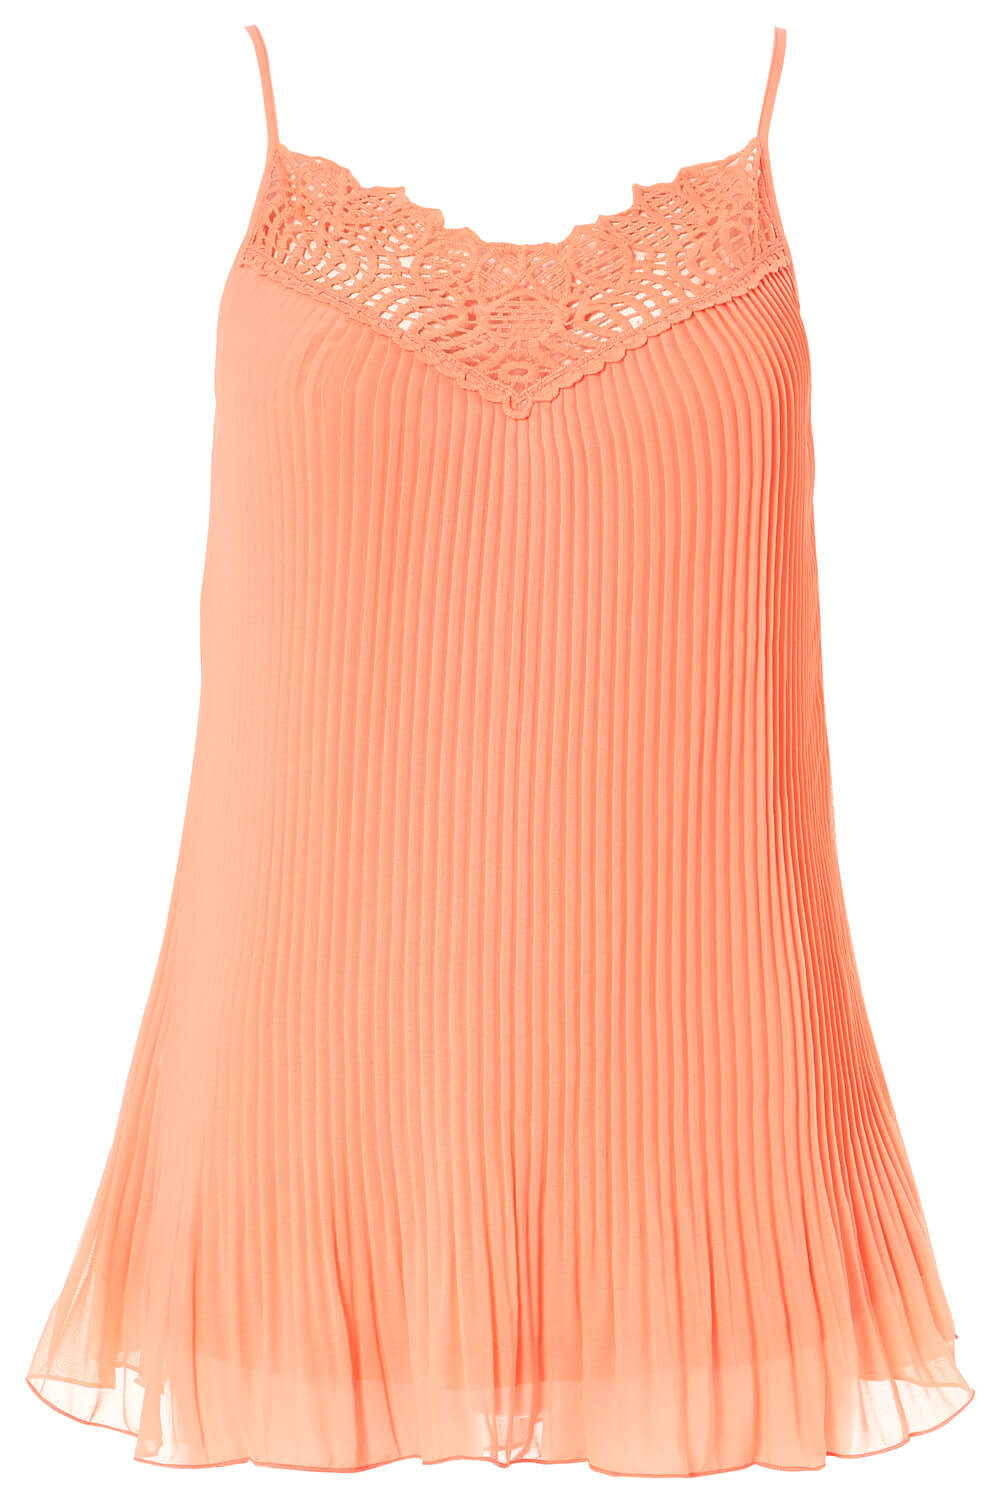 CORAL Pleated Lace Trim Cami Top, Image 5 of 5